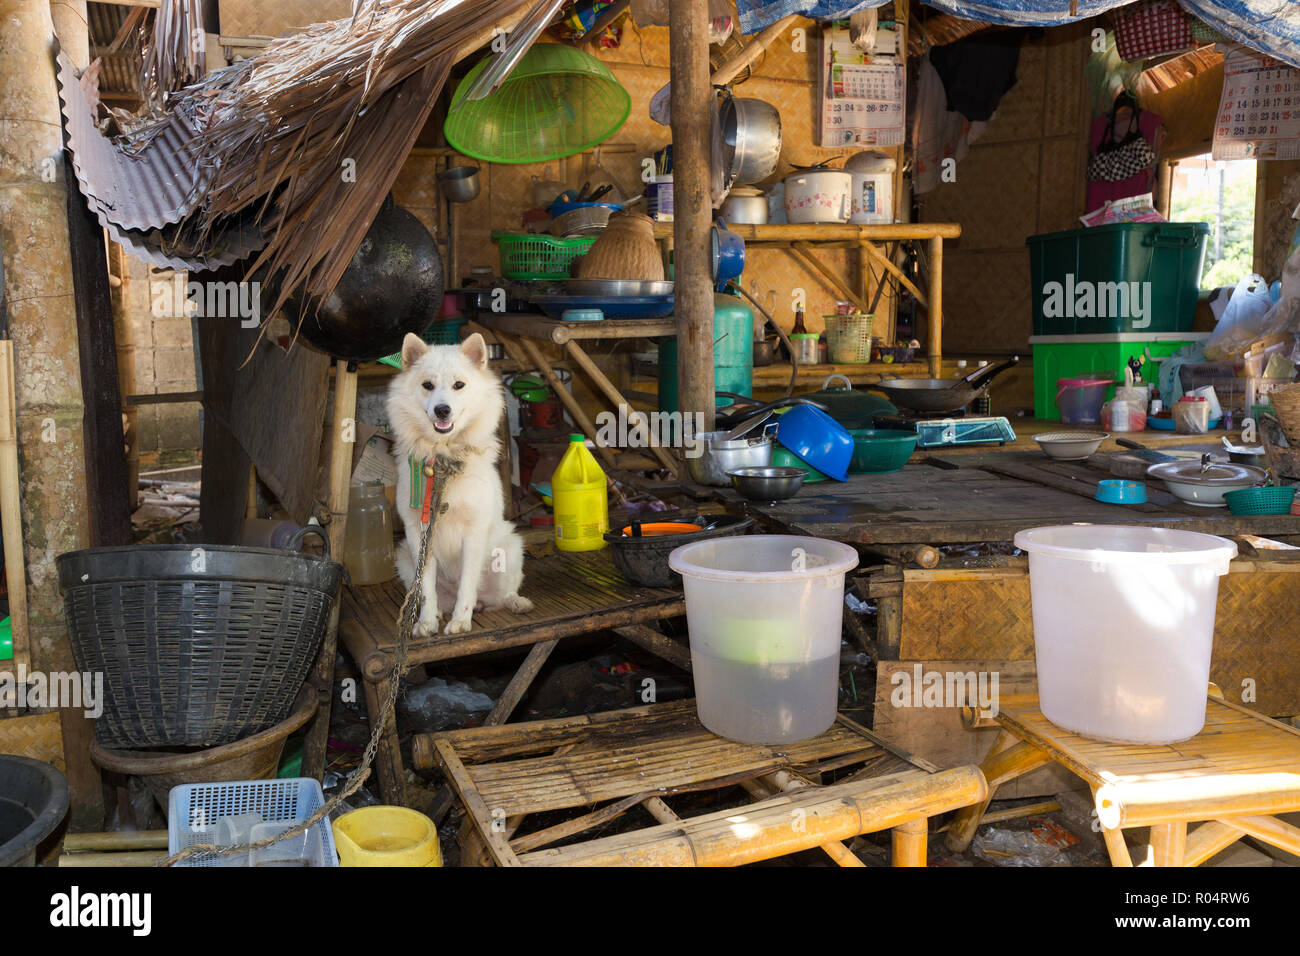 Dog in a traditional and messy Thai kitchen Stock Photo